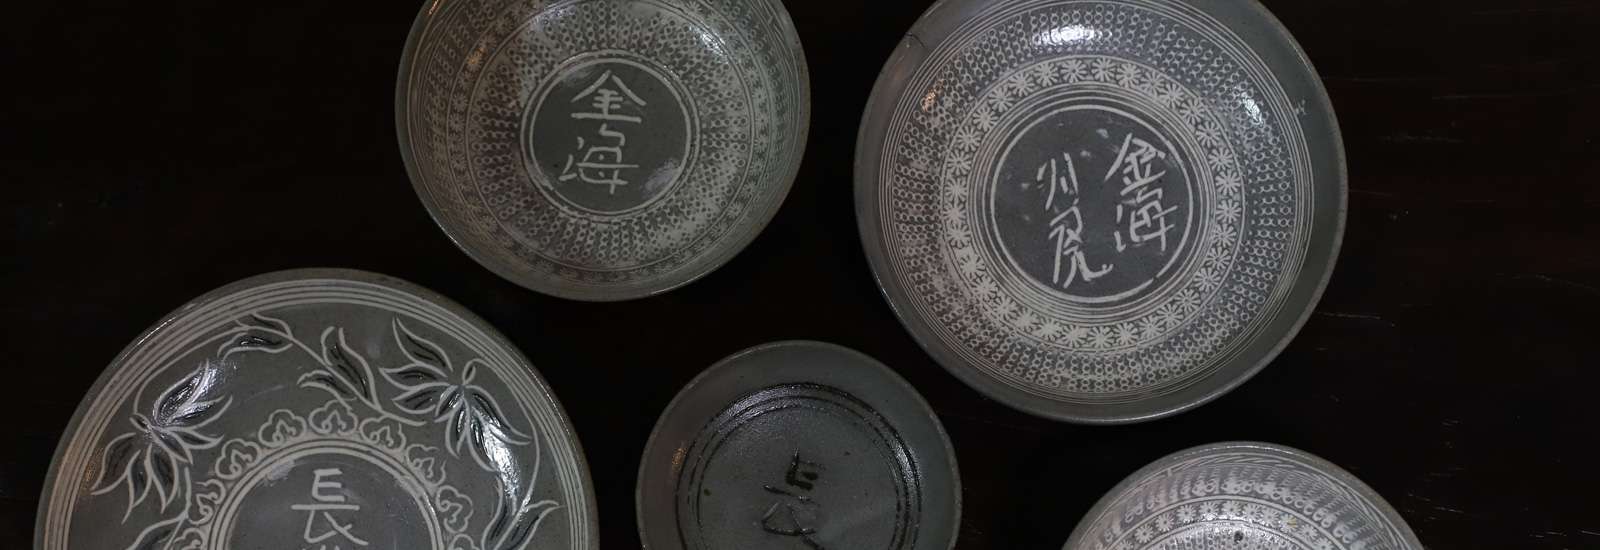 Reproduction of Gimhae Tea Bowls